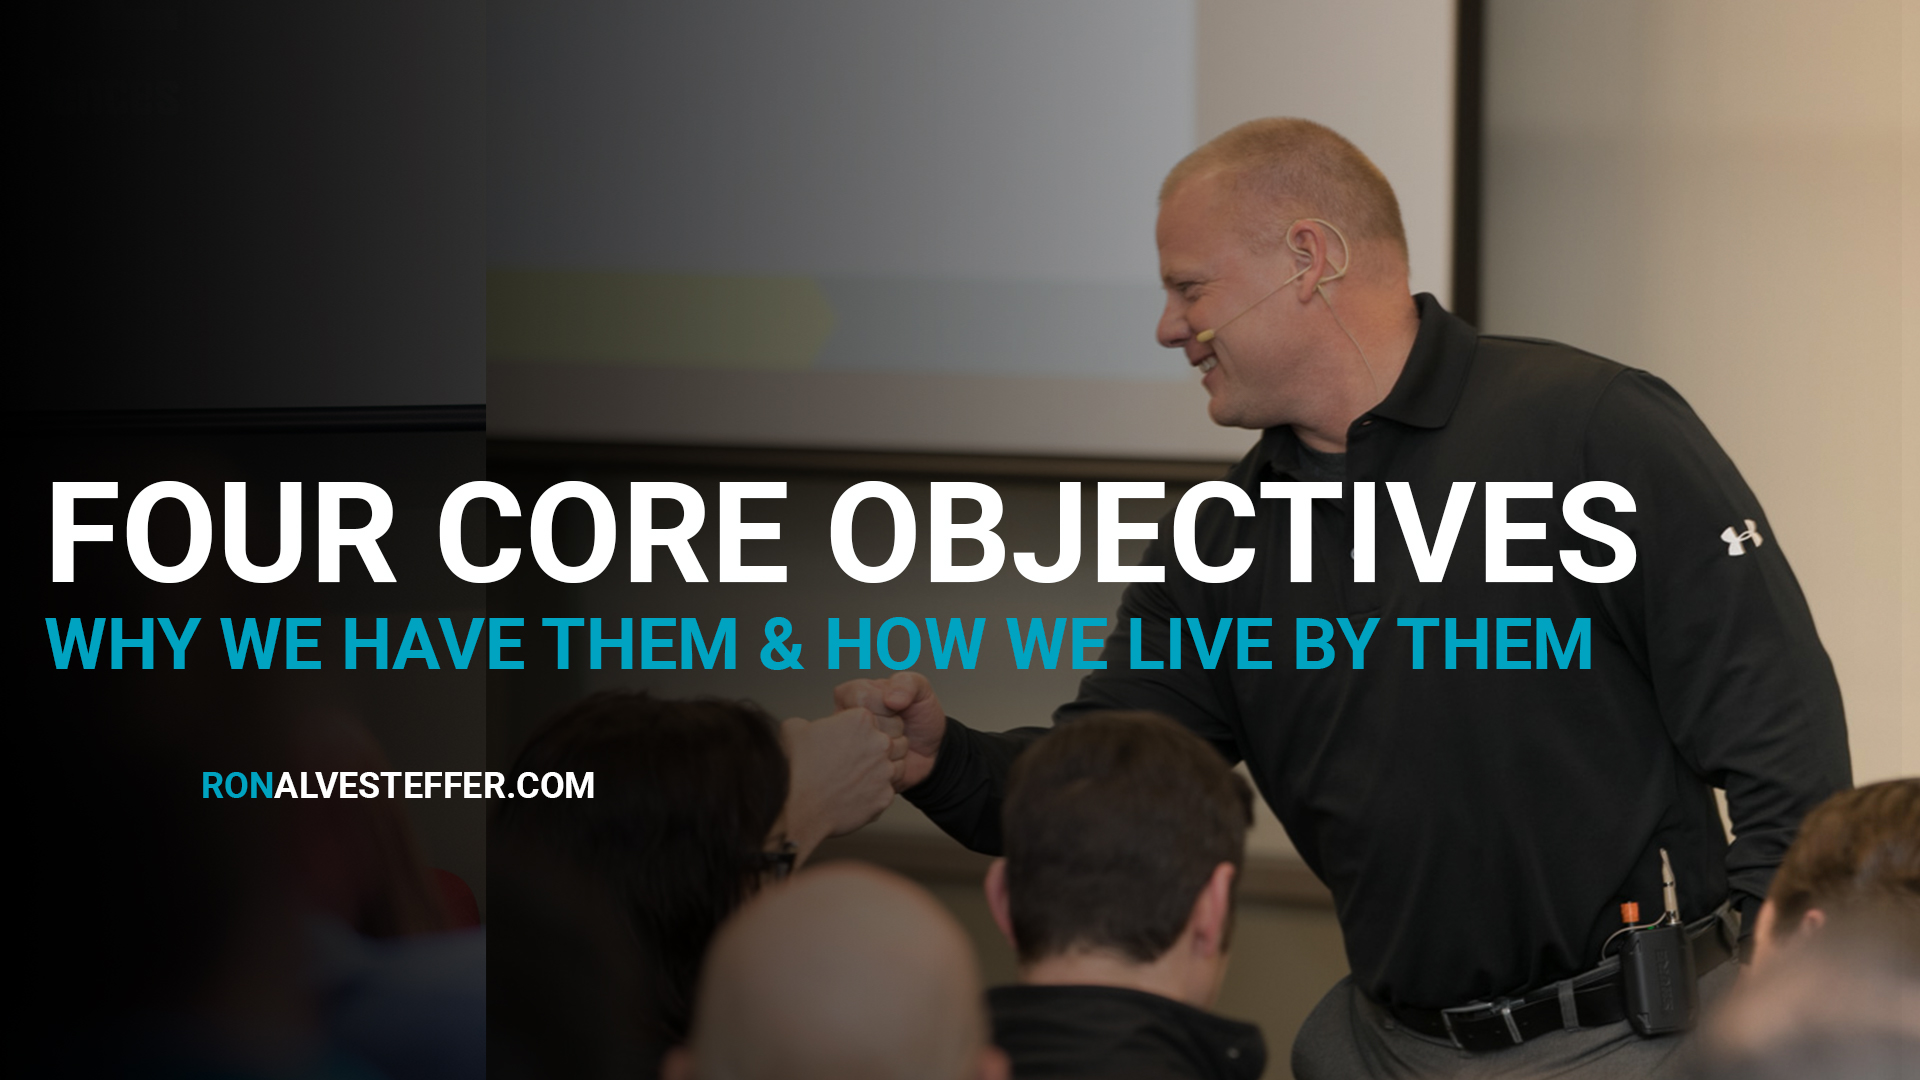 Four Core Objectives: Why We Have Them and How We Live By Them